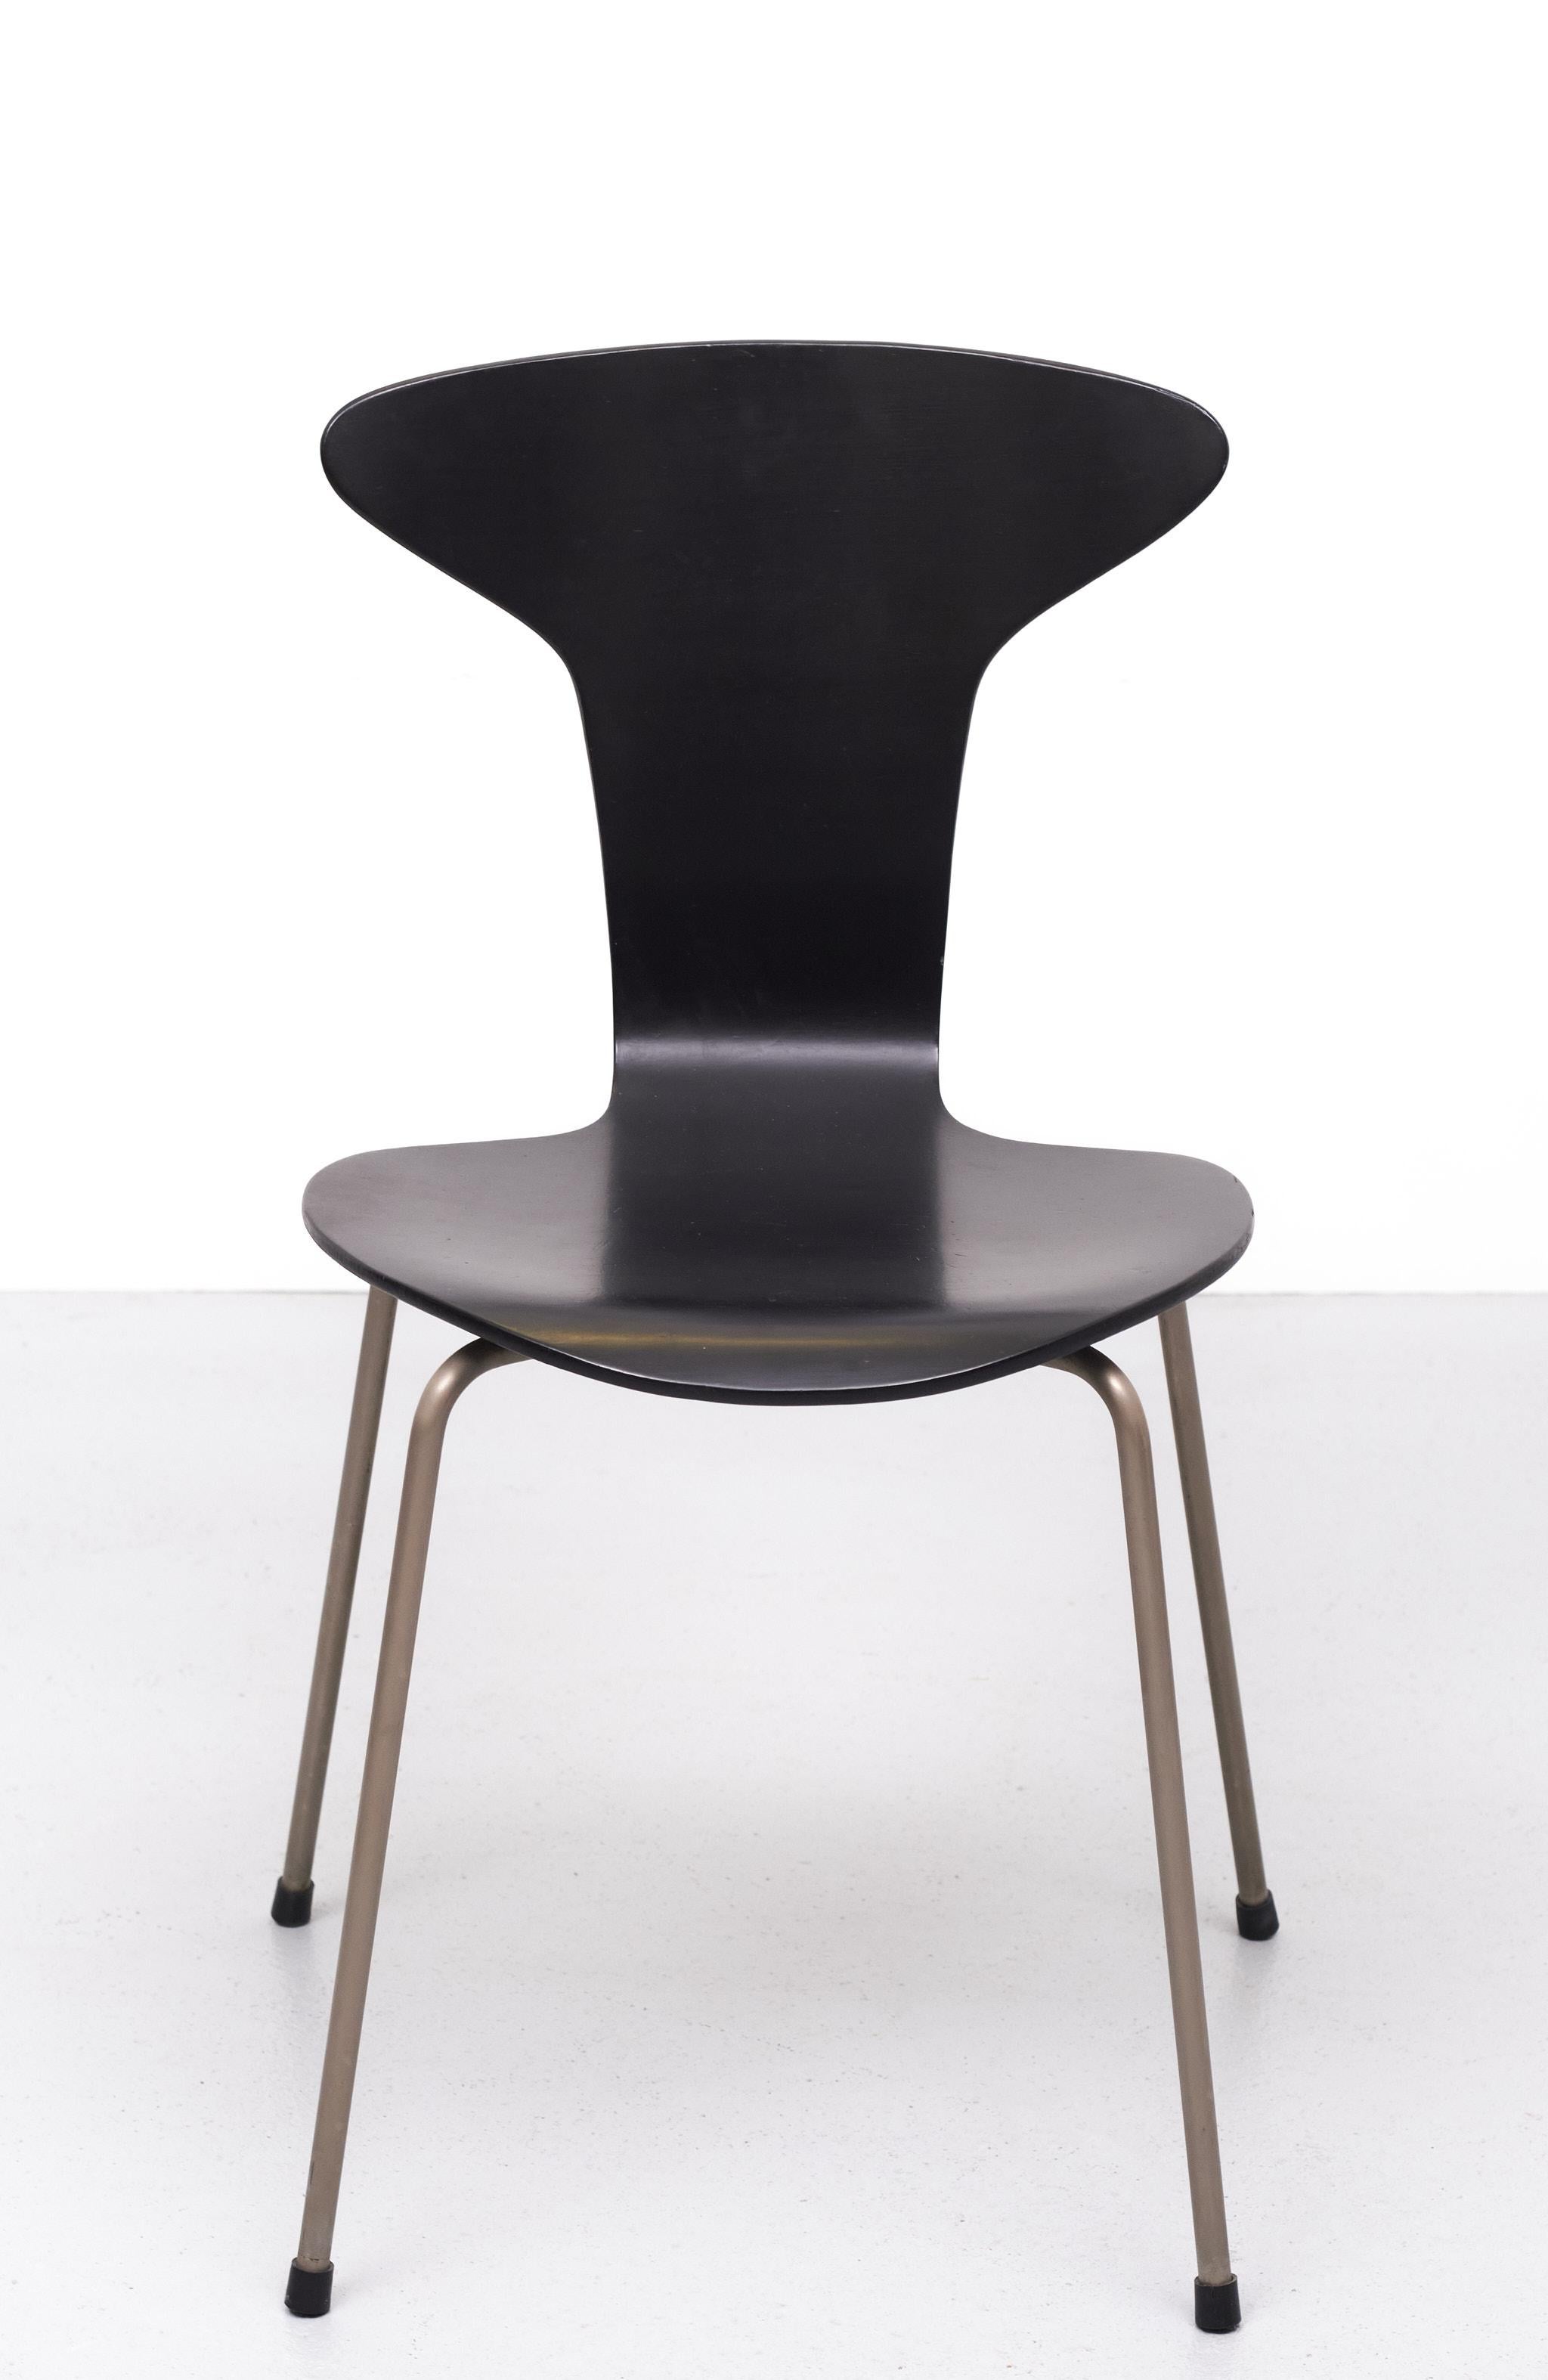 Mid-Century Modern Mosquito Chair 3105 by Arne Jacobsen for Fritz Hansen, 1960s For Sale